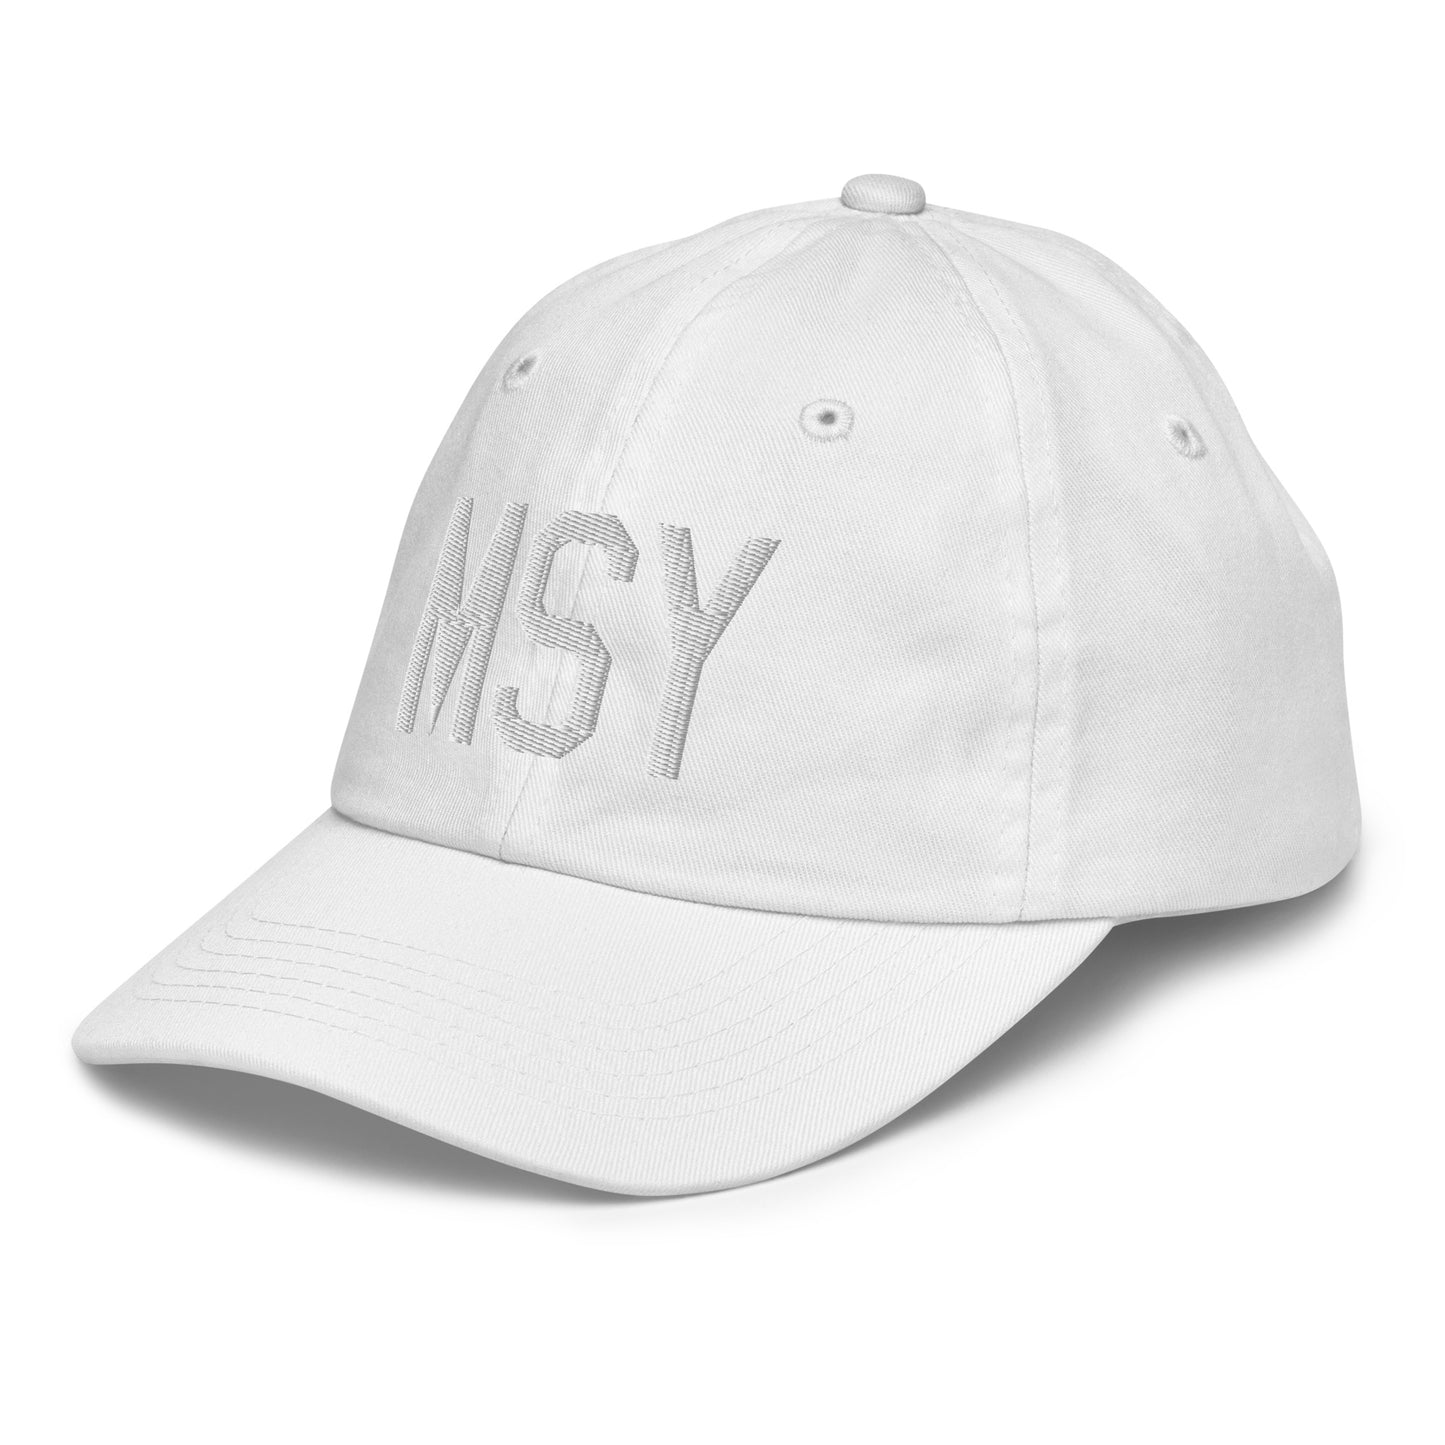 Airport Code Kid's Baseball Cap - White • MSY New Orleans • YHM Designs - Image 36